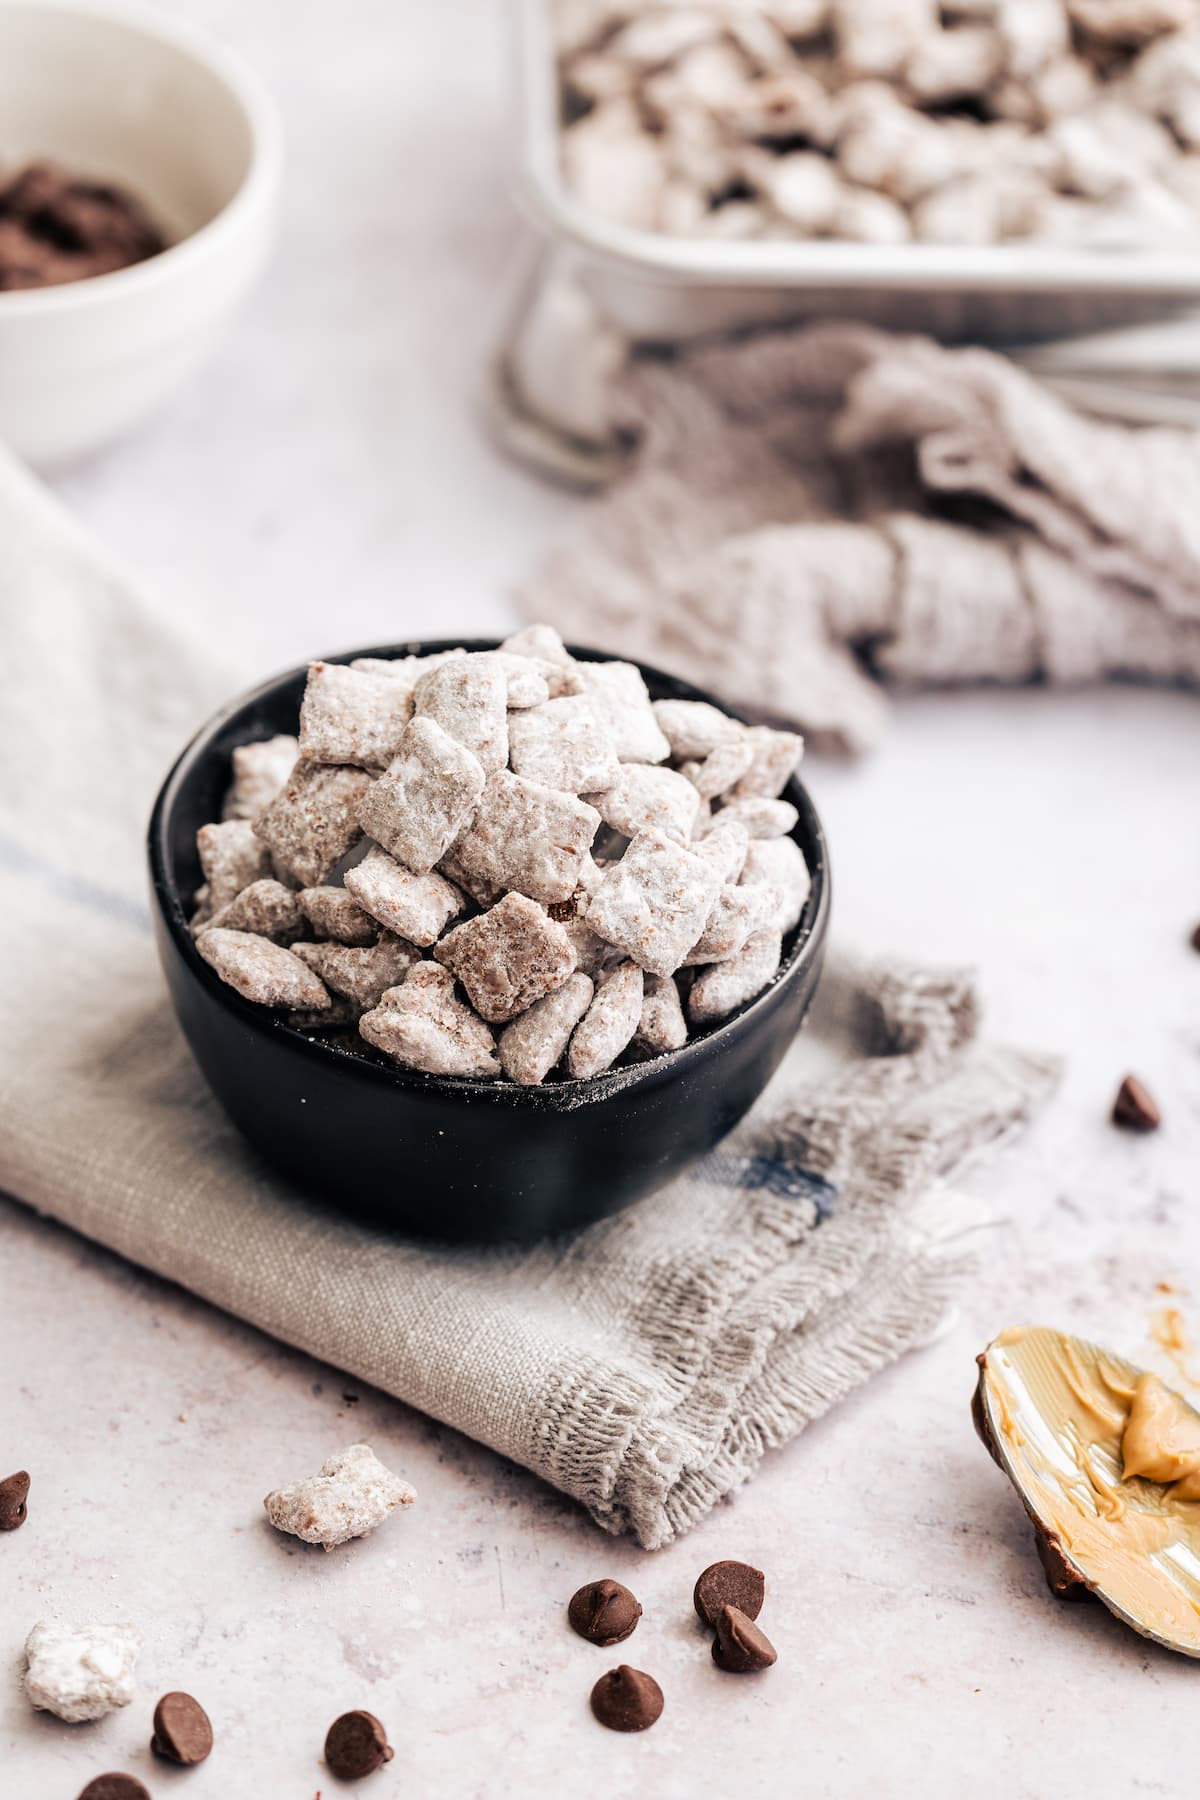 A bowl of puppy chow on a grey cloth, surrounded by scattered puppy chow and a spoon covered with peanut butter.